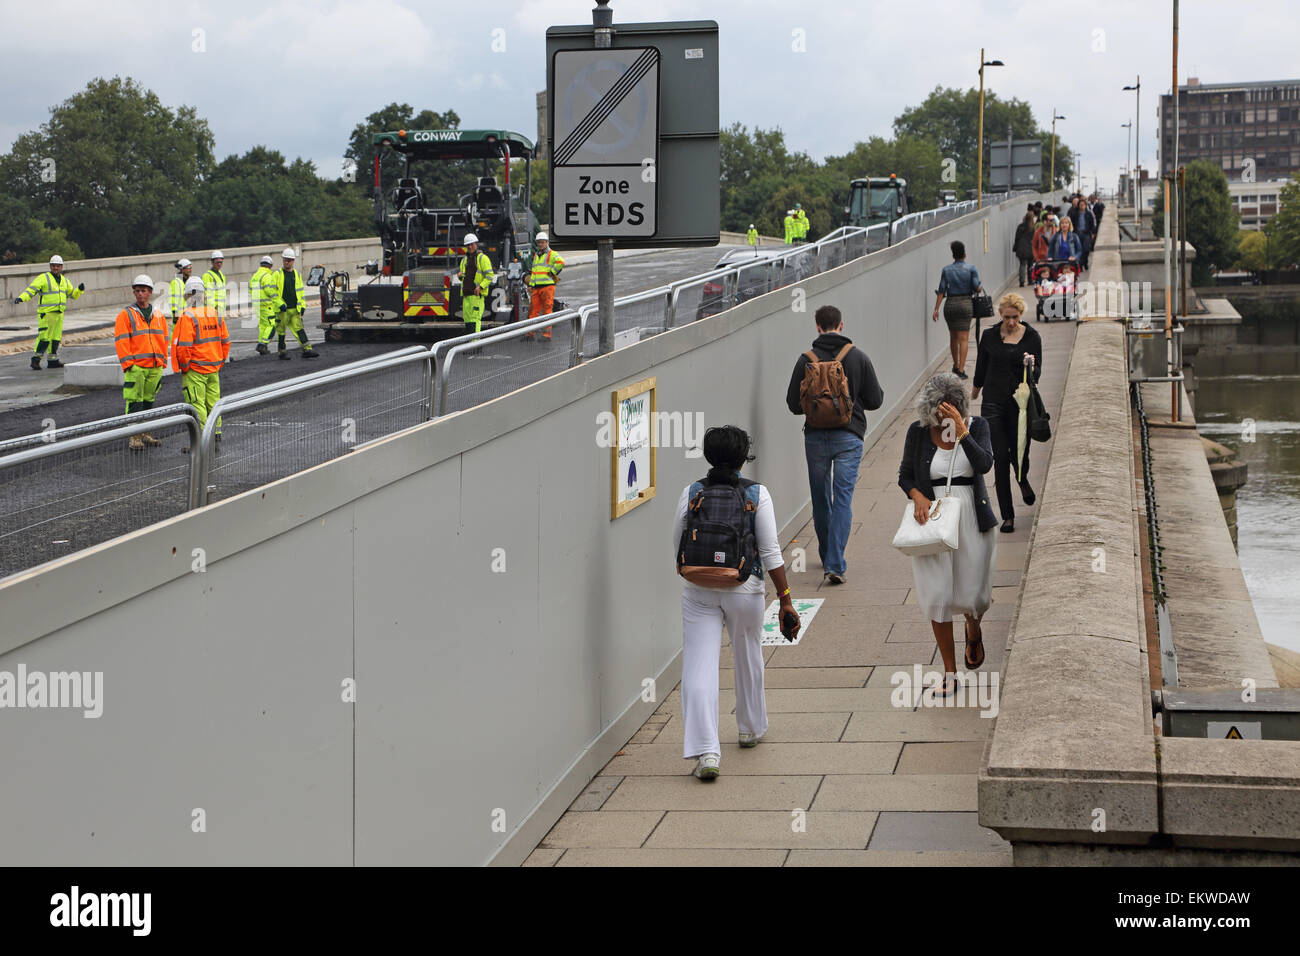 Pedestrians segregated from construction work by a temporary hoarding on Putney Bridge, west London. Bridge closed to traffic. Stock Photo